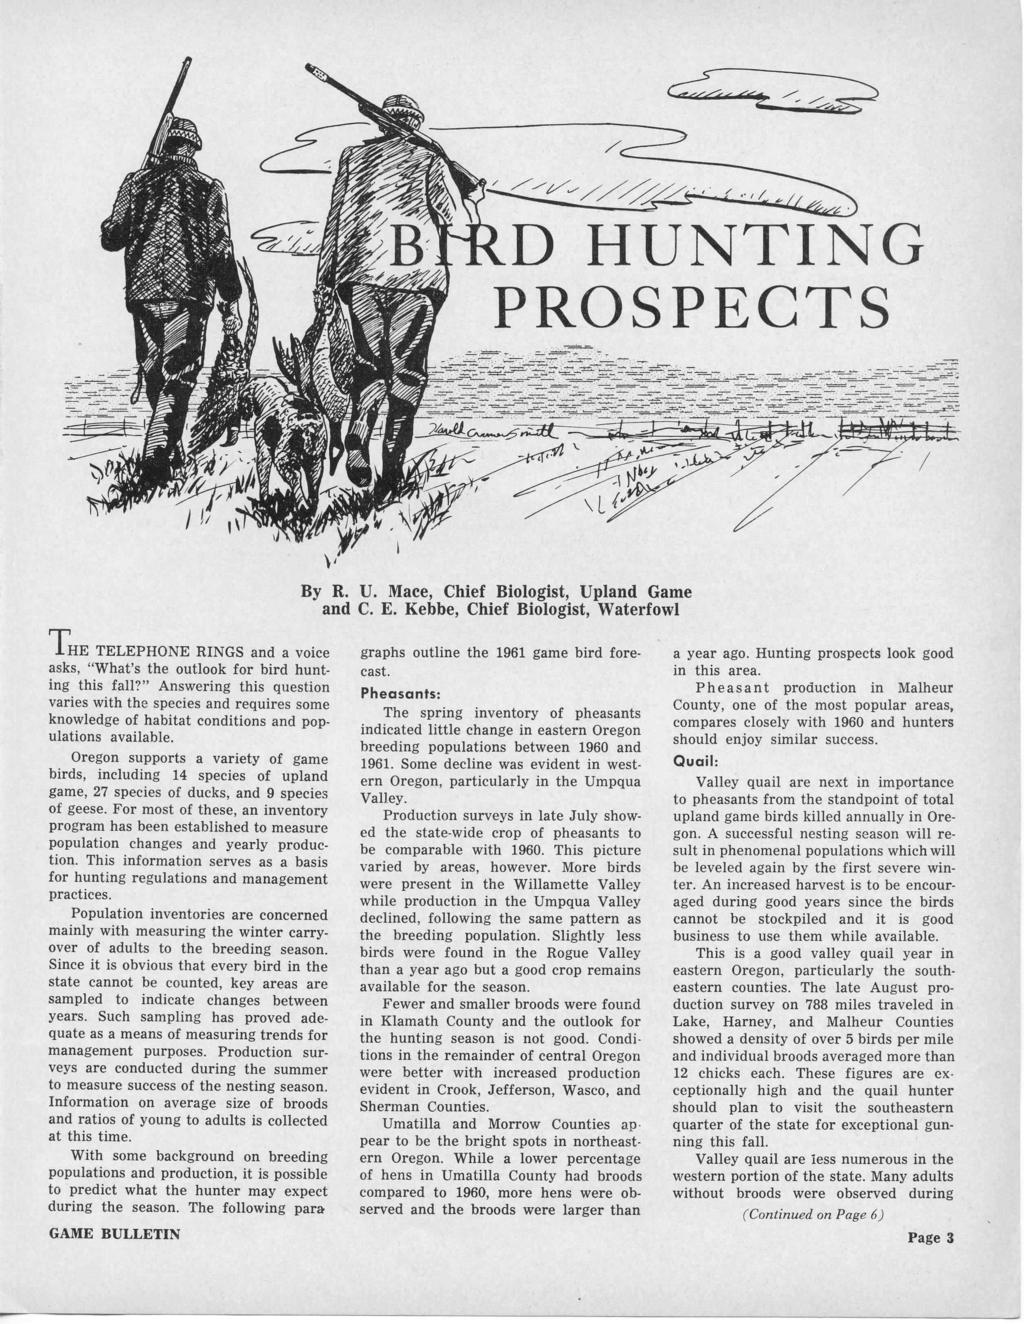 ,, D HUNTING PROSPECTS By R. U. Mace, Chief Biologist, Upland Game and C. E. Kebbe, Chief Biologist, Waterfowl THE TELEPHONE RINGS and a voice asks, "What's the outlook for bird hunting this fall?